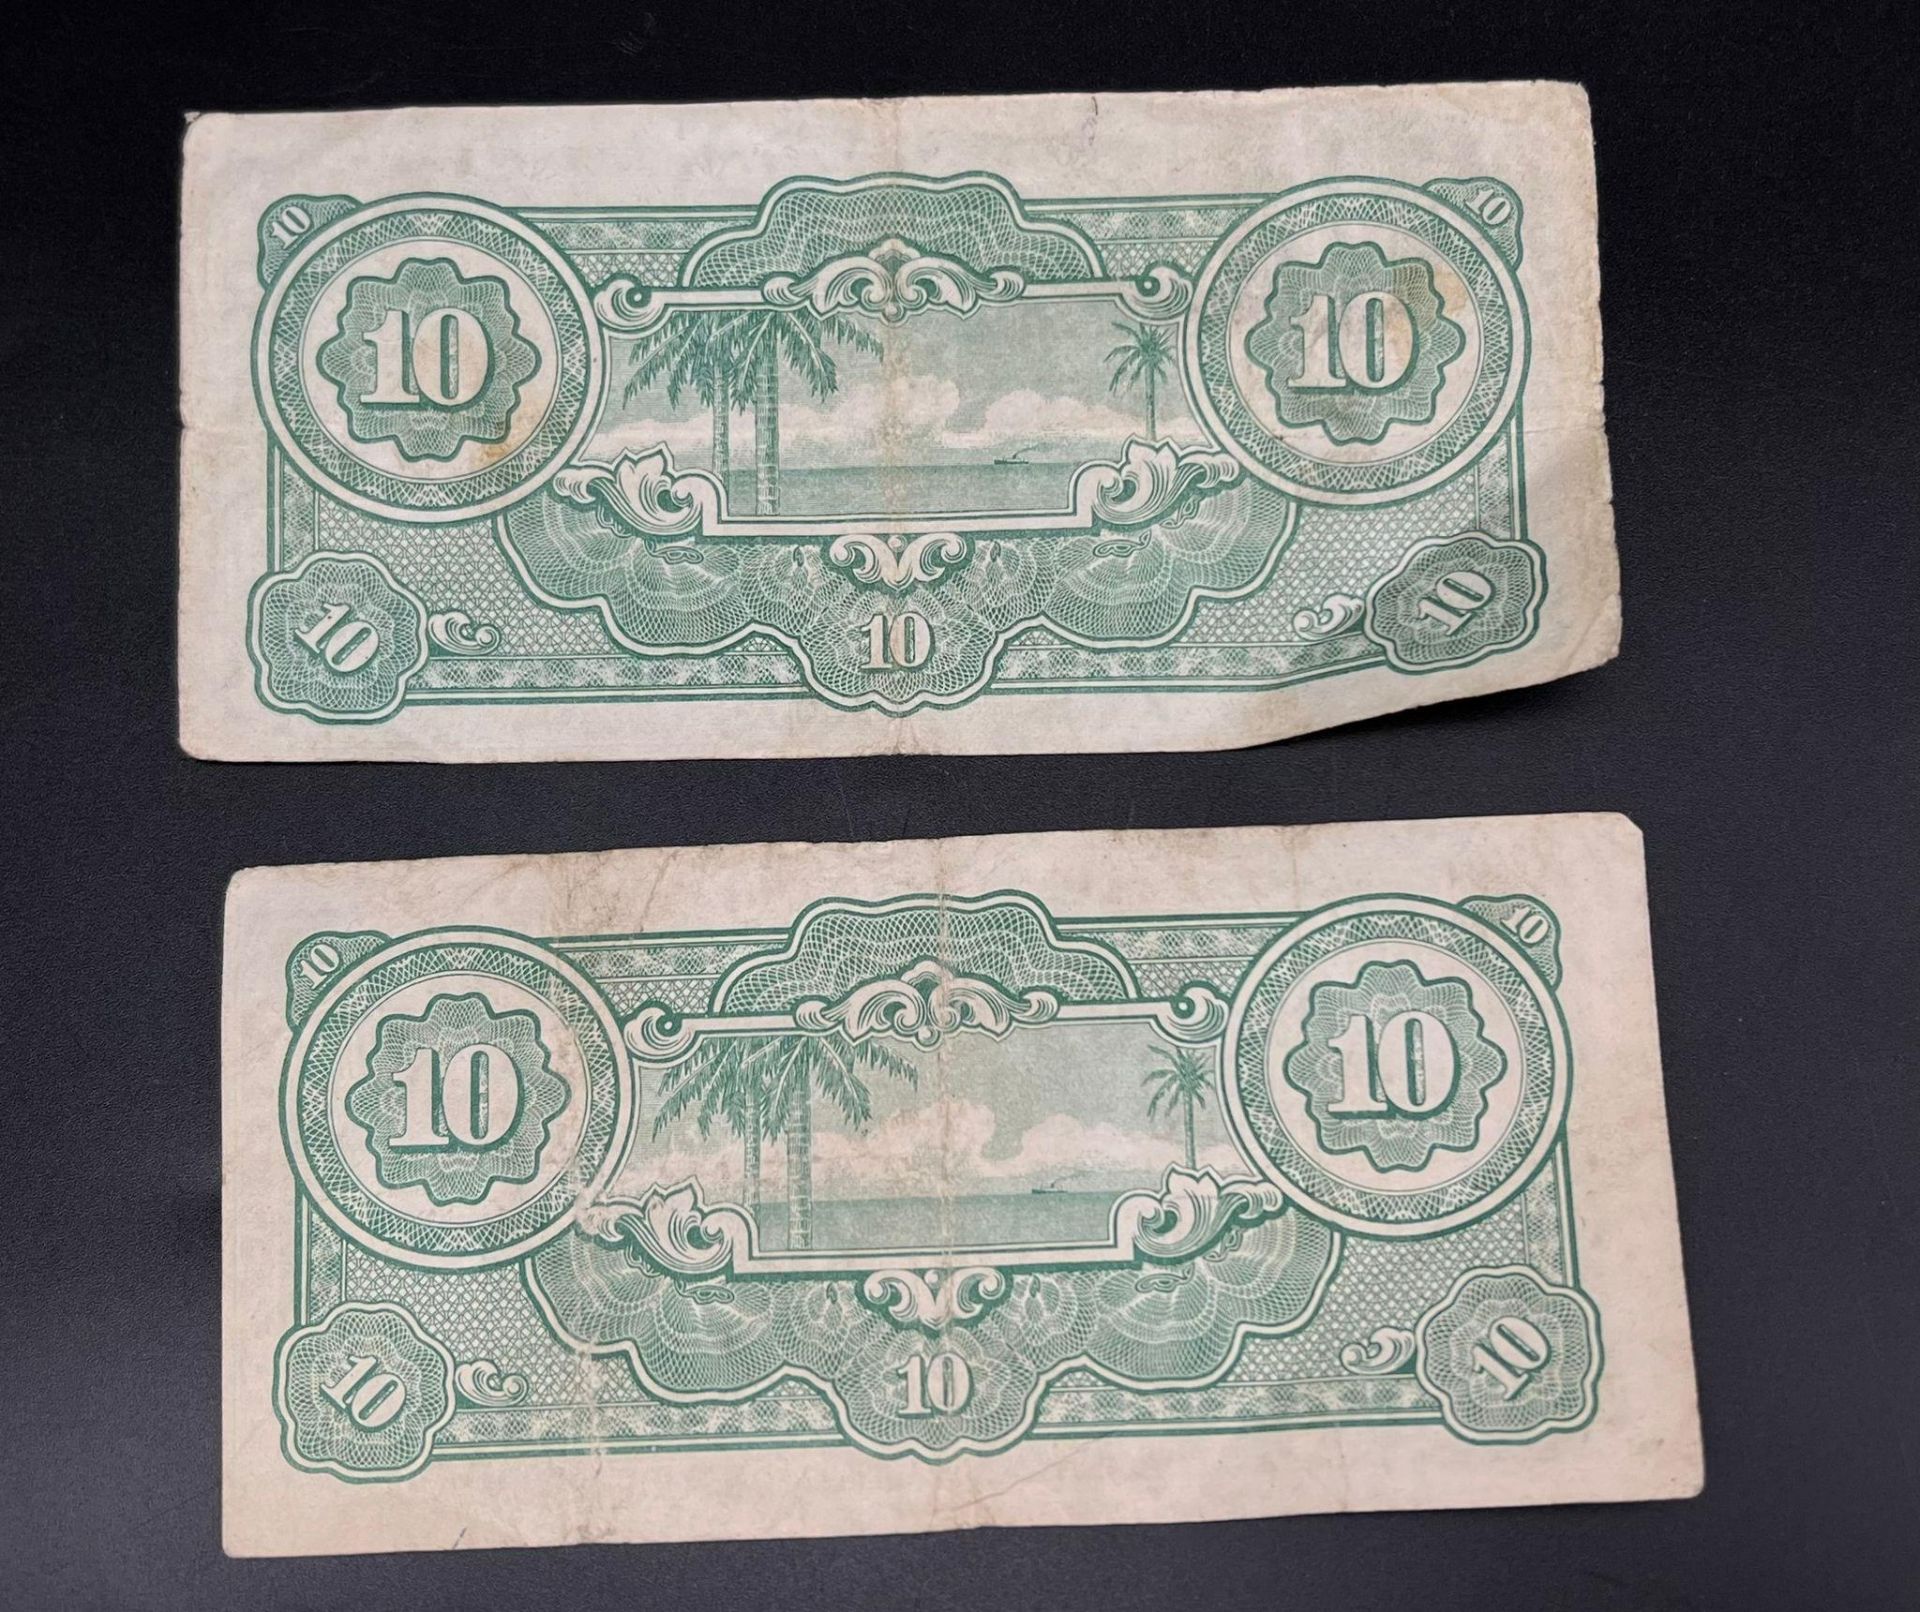 Two Scarce World War 2 Issue Japanese Government Issue 10 Dollar Notes. - Bild 2 aus 2